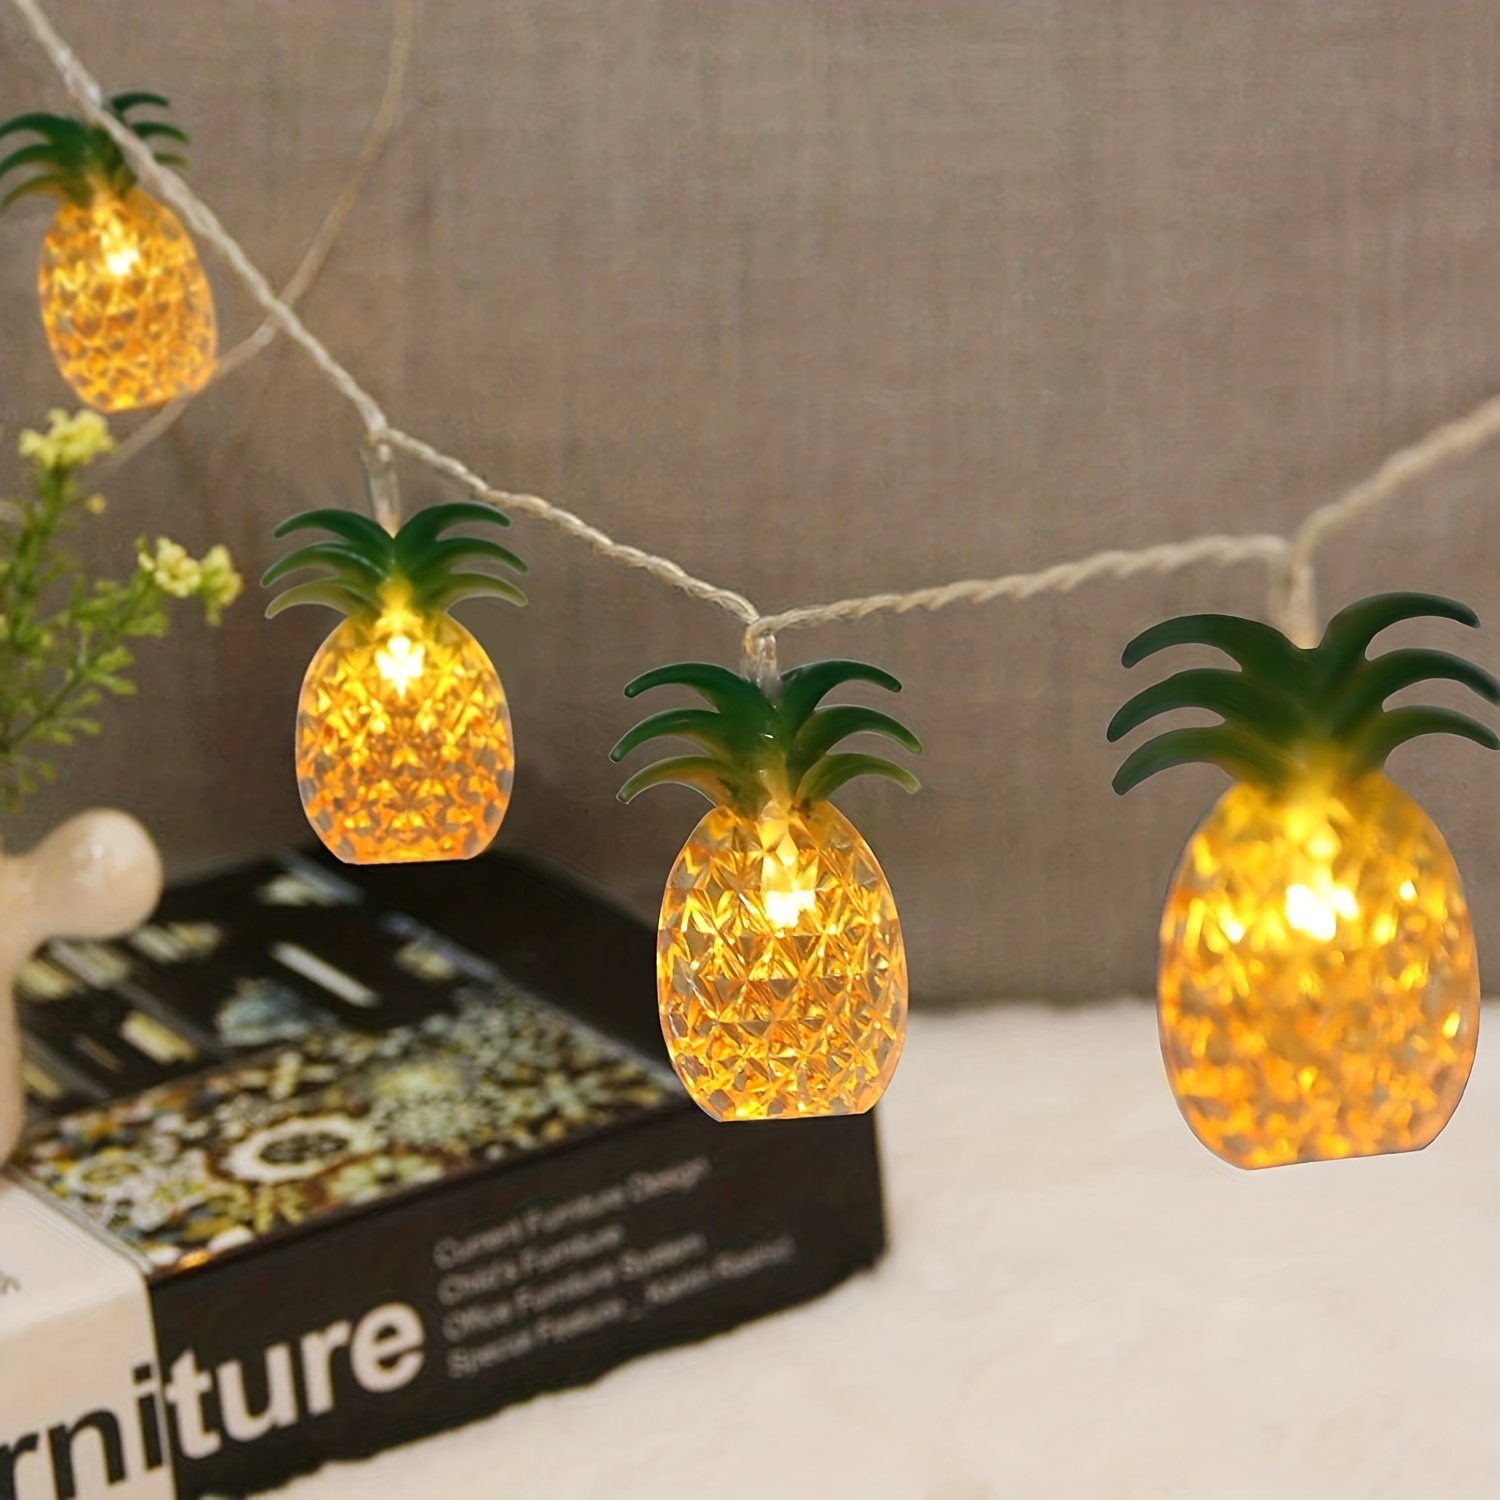 

1pc, Pineapple String Lights, Battery Operated, 10 Fun Patio Lights, Party Bedroom Home Birthday Indoor Decor, Outdoor Hawaiian Tropical Gifts Decor